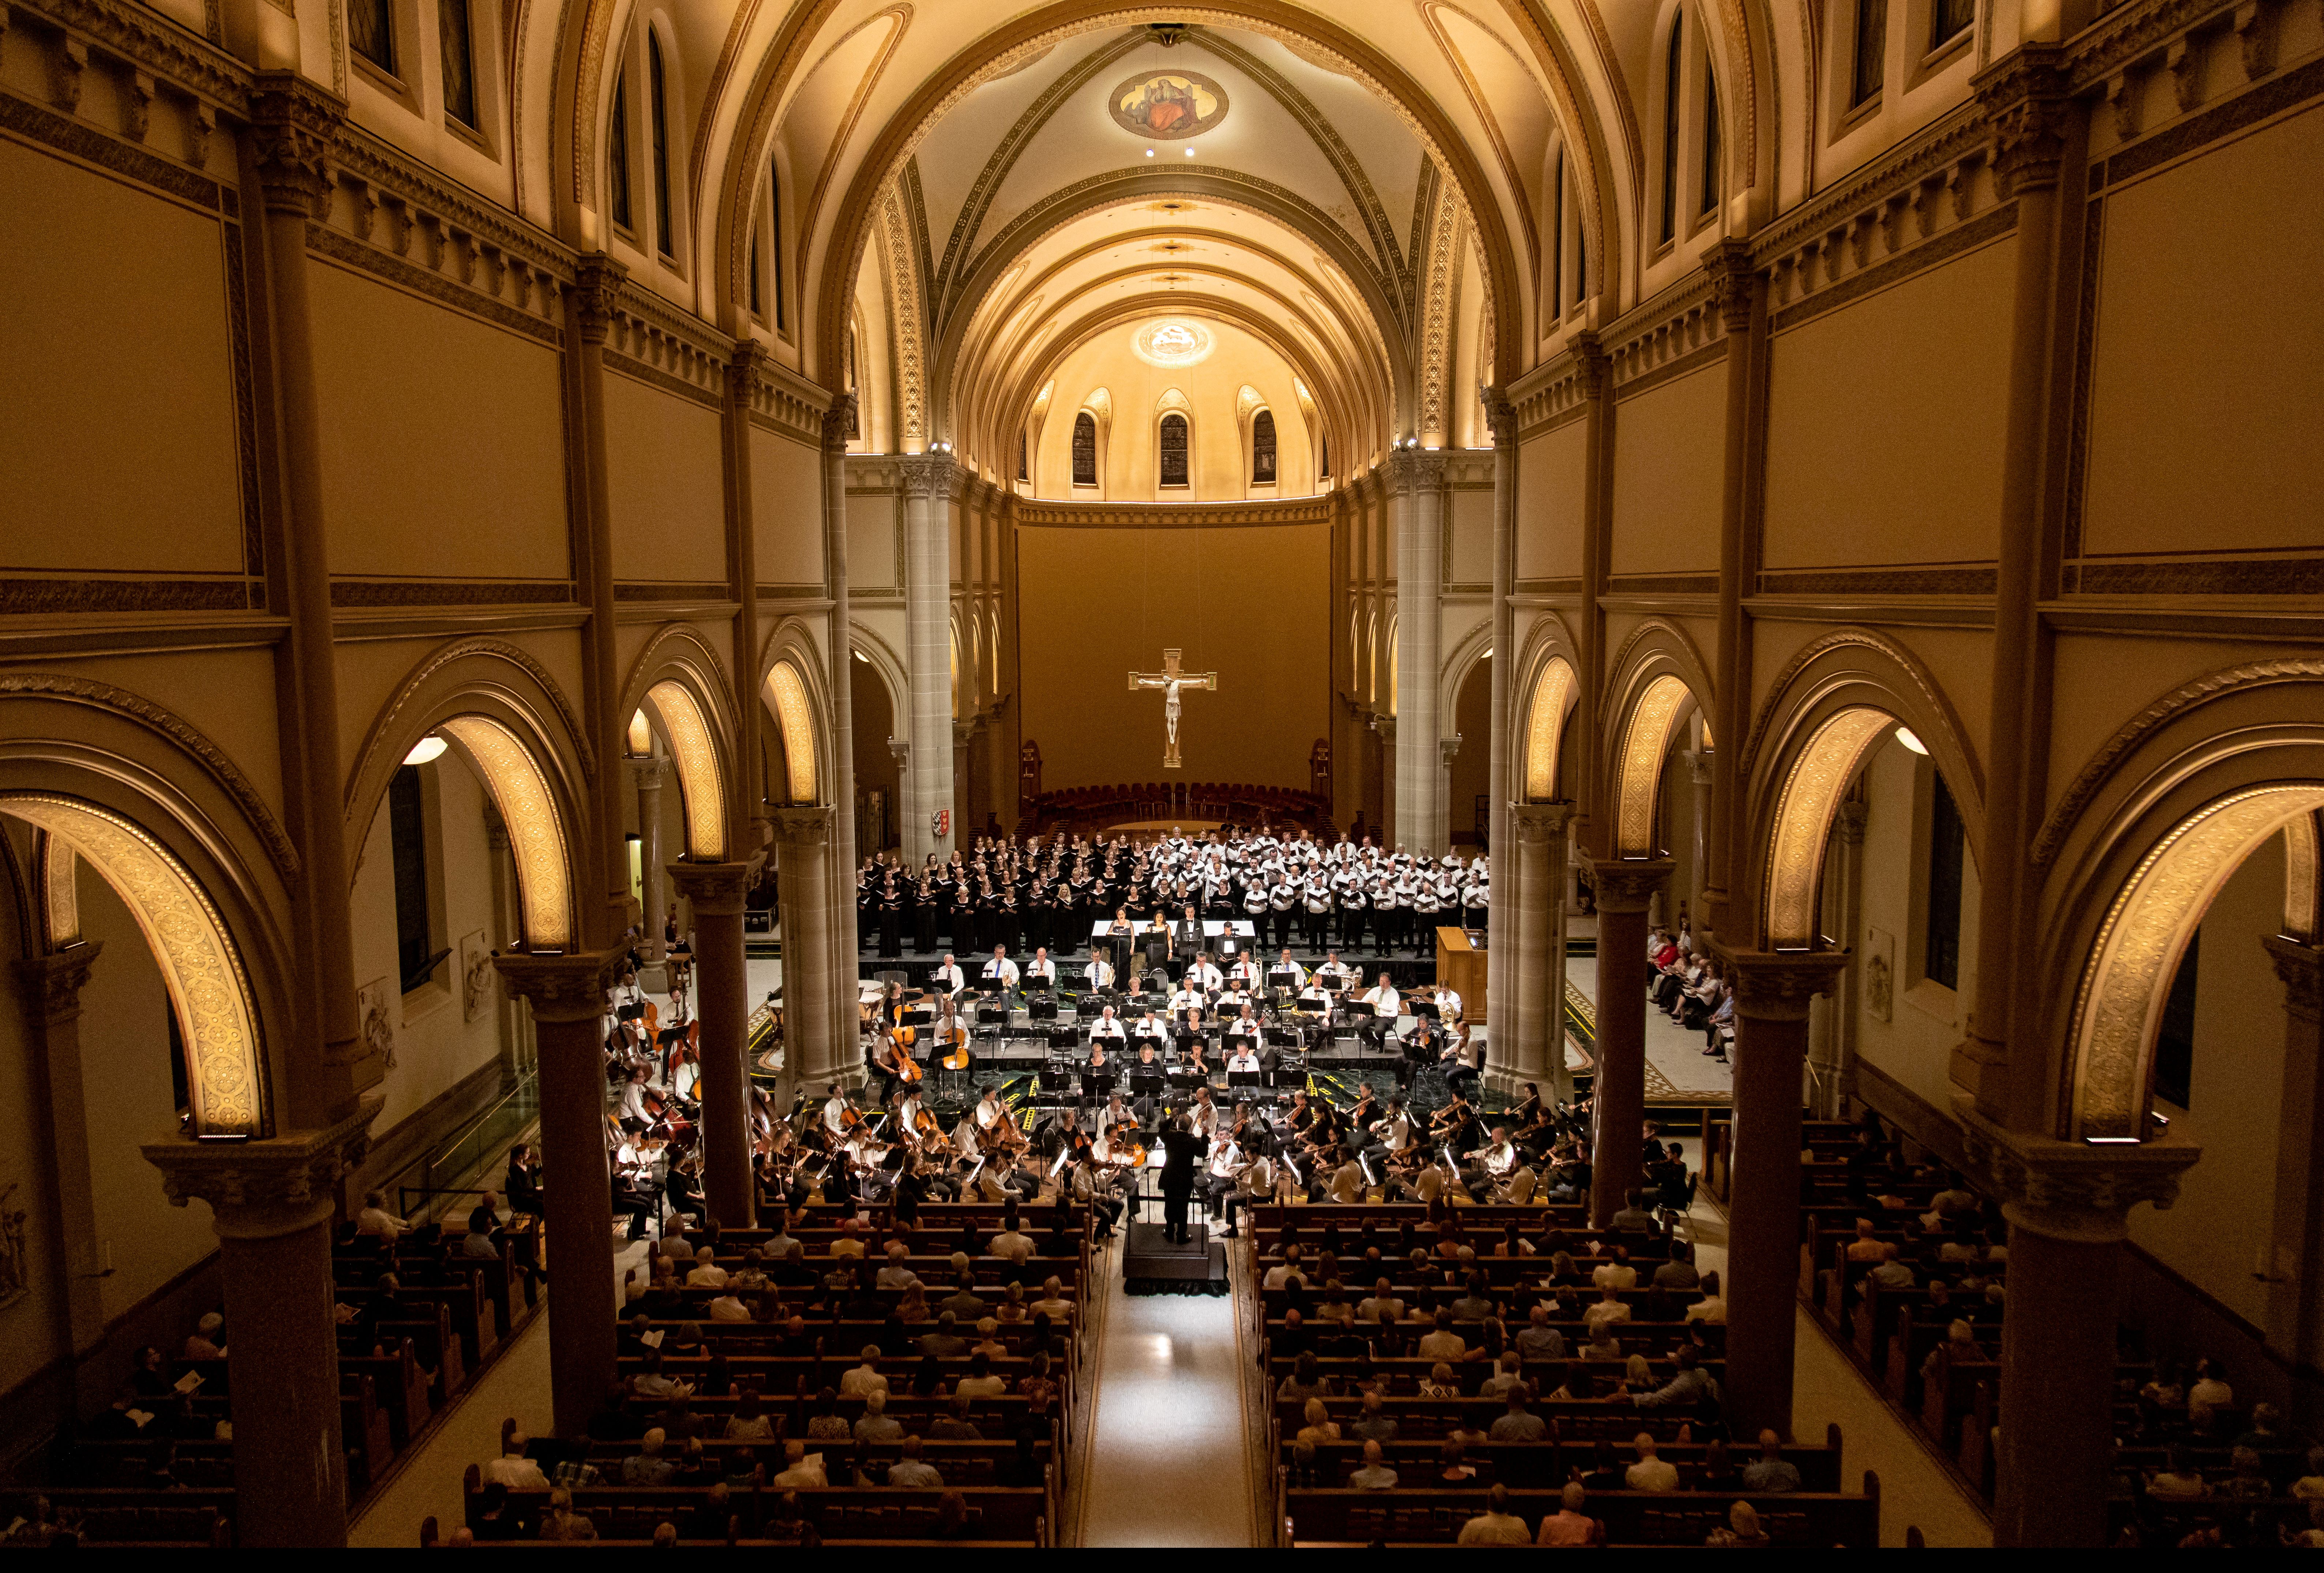 SOLD OUT: Pittsburgh Symphony Orchestra to perform Handel’s “Messiah” at Saint Vincent Basilica